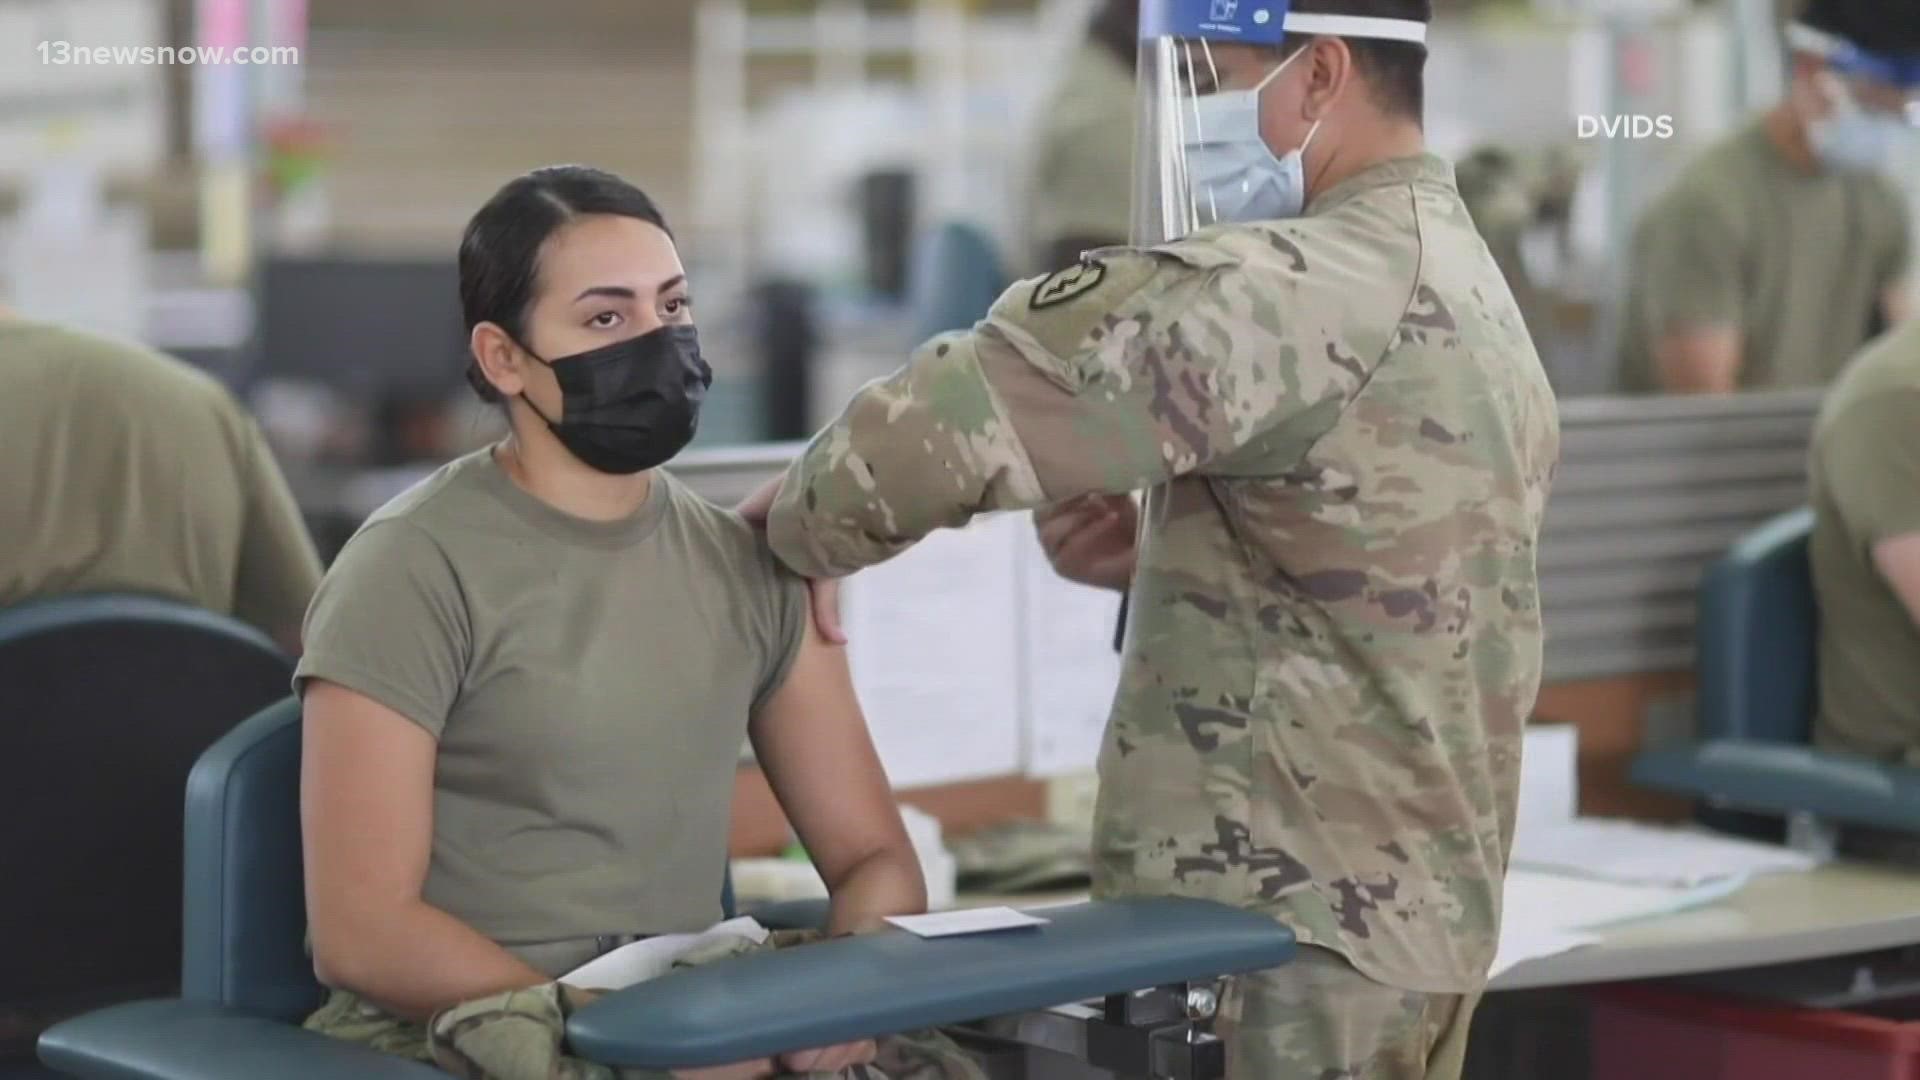 The deadline for U.S. military members could be pushed up if the vaccine receives final FDA approval before then or infection rates continue to rise.